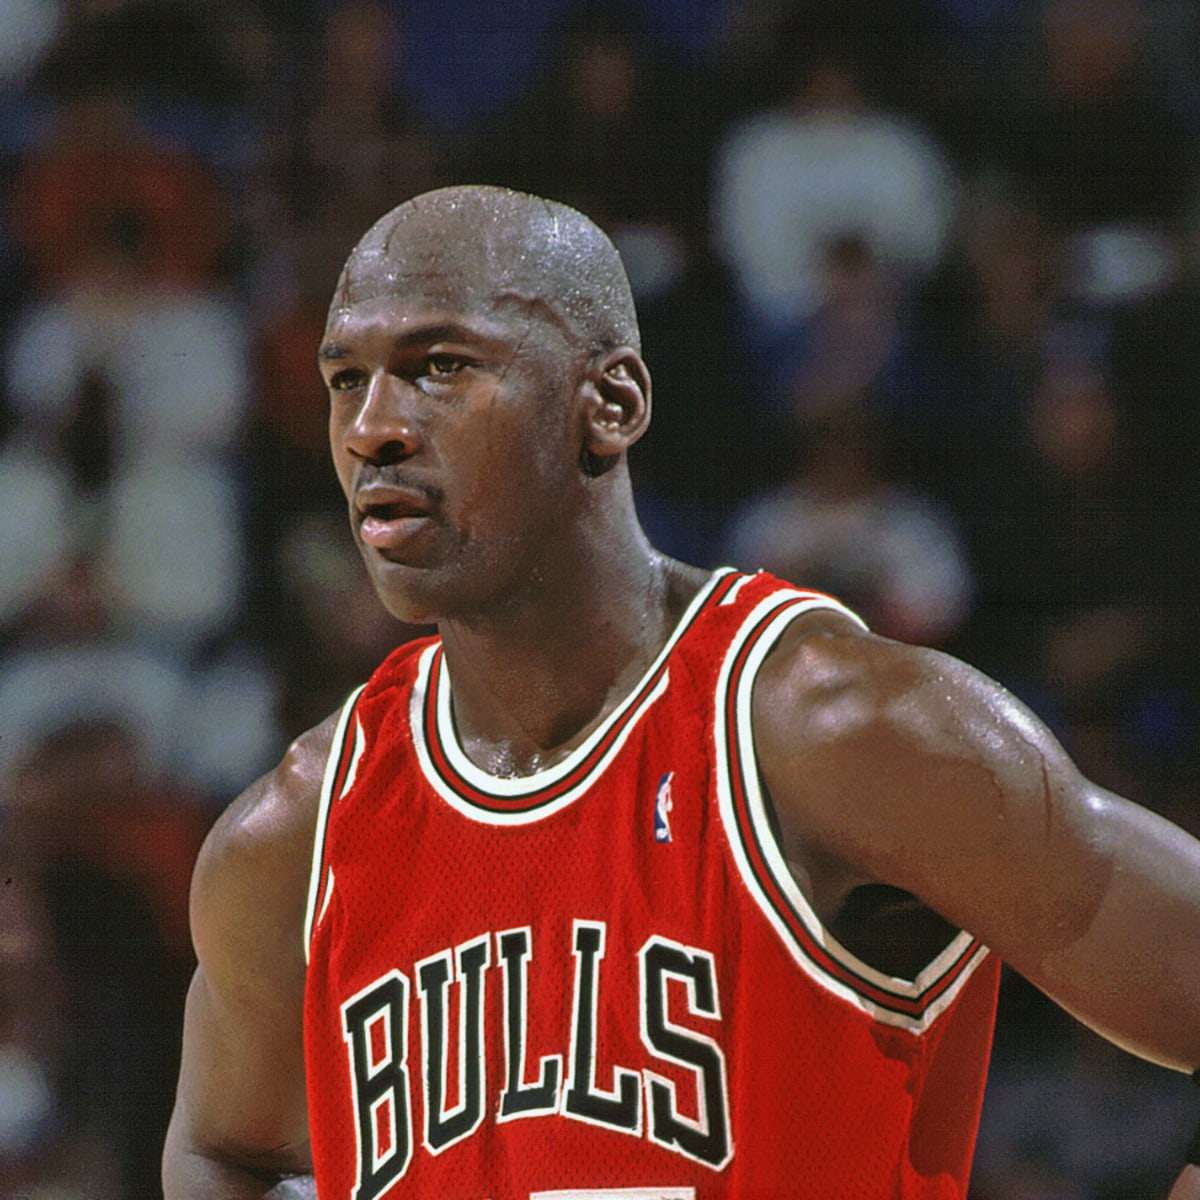 Game-Used MJ Jersey From1998 NBA Finals Heading to Auction